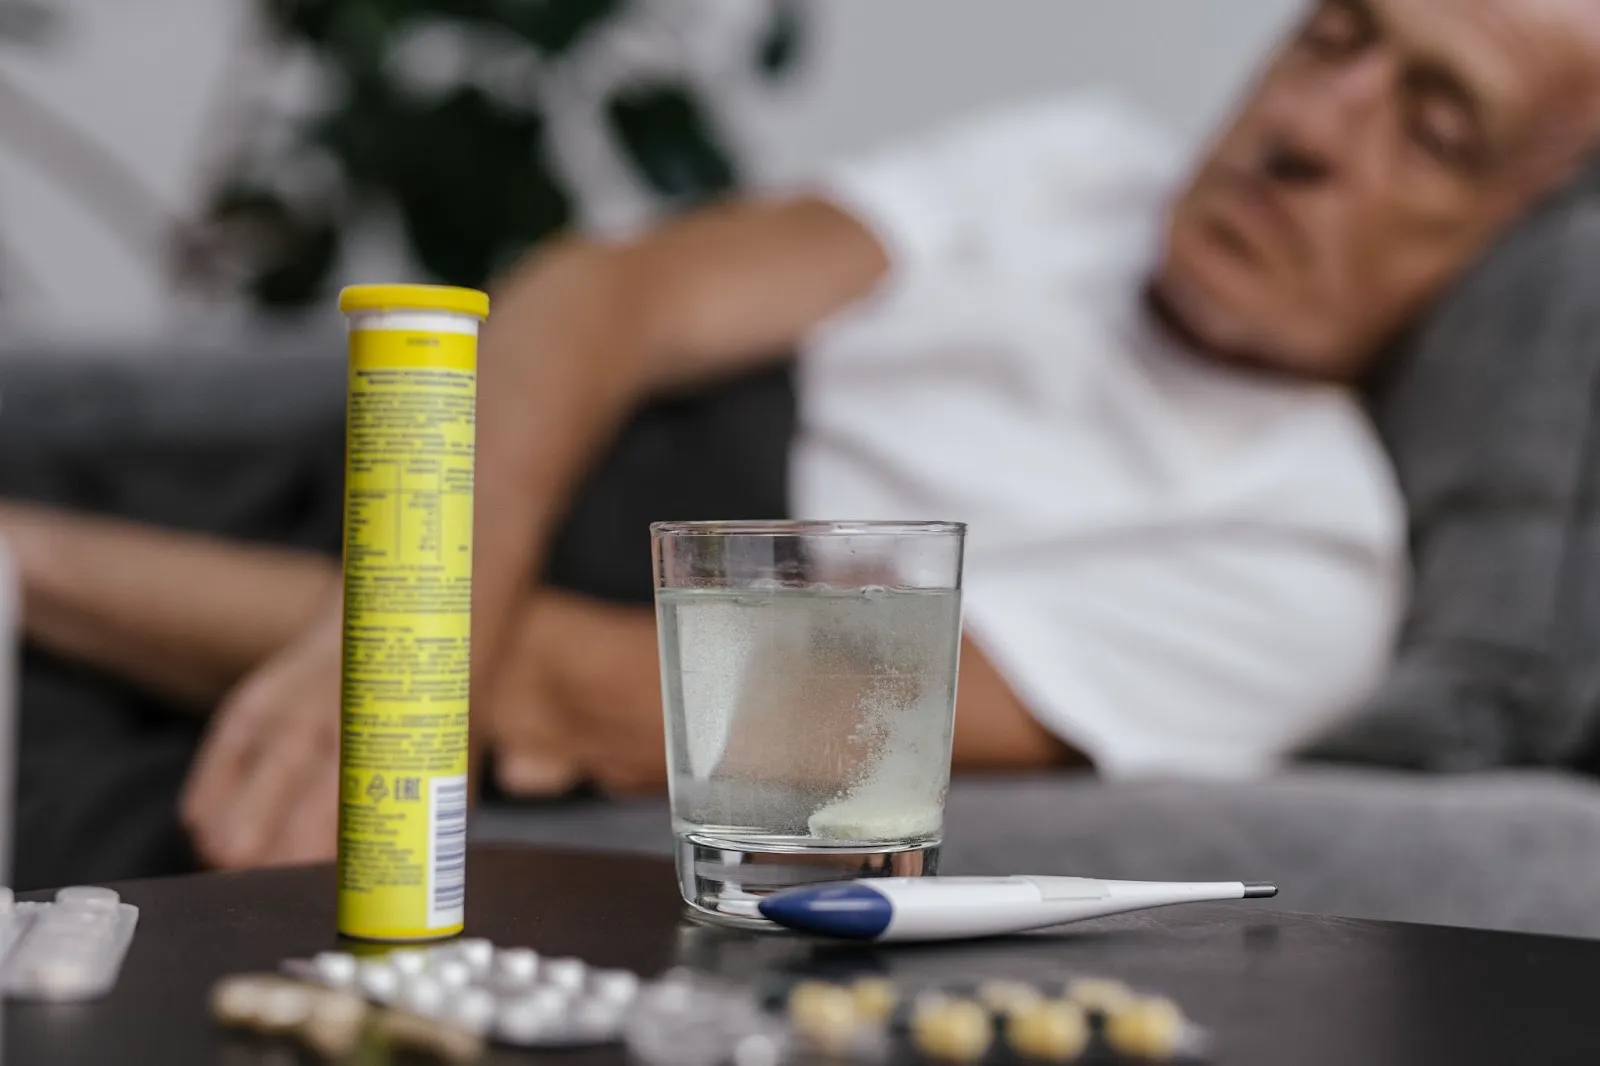 Man sitting on couch looking at medicine, glass of water, and thermometer sitting on desk